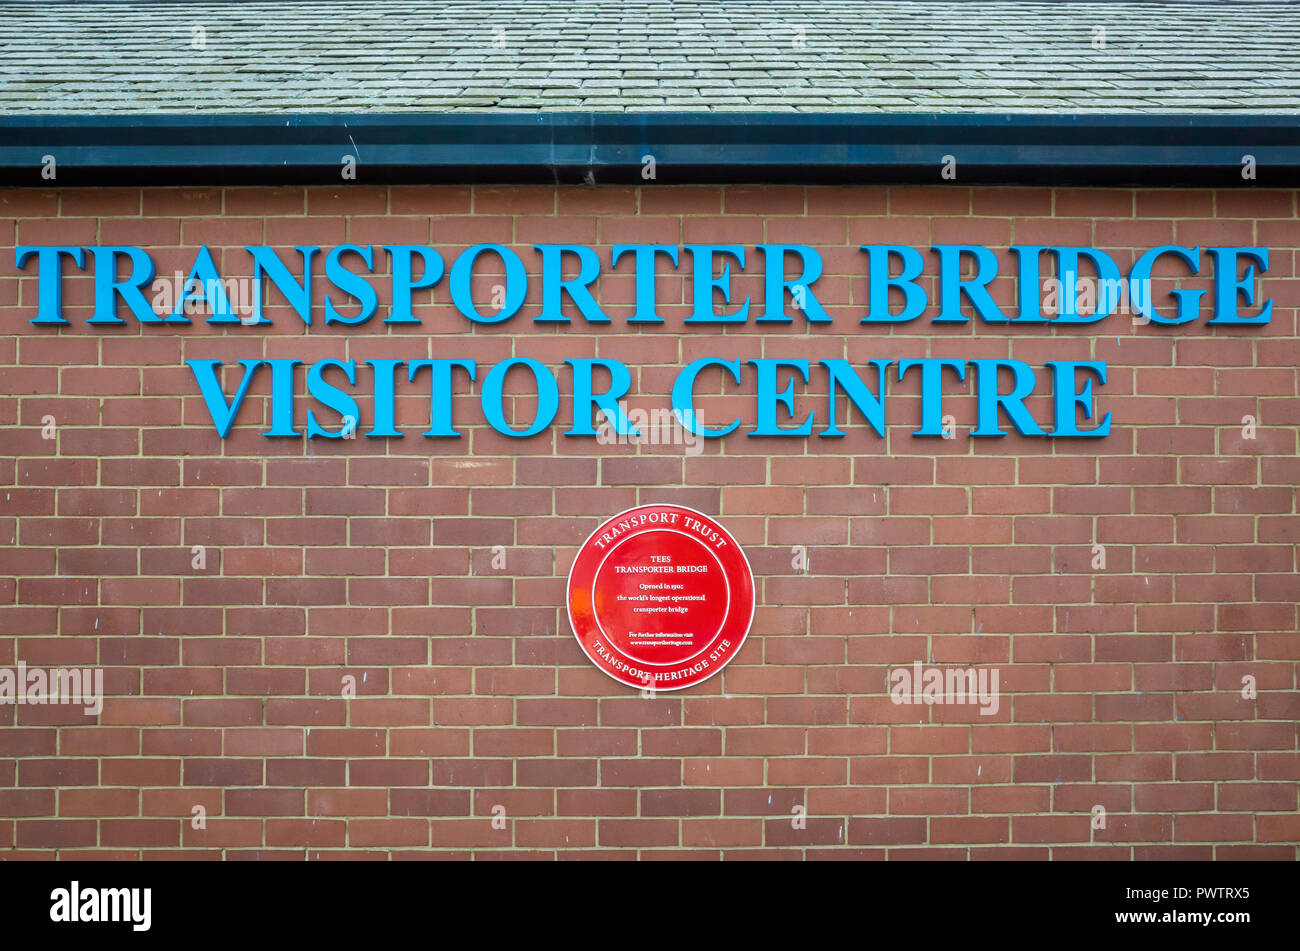 Middlesbrough Transporter Bridge Visitor Centre sign and a red Plaque for a Transport Heritage Site Stock Photo